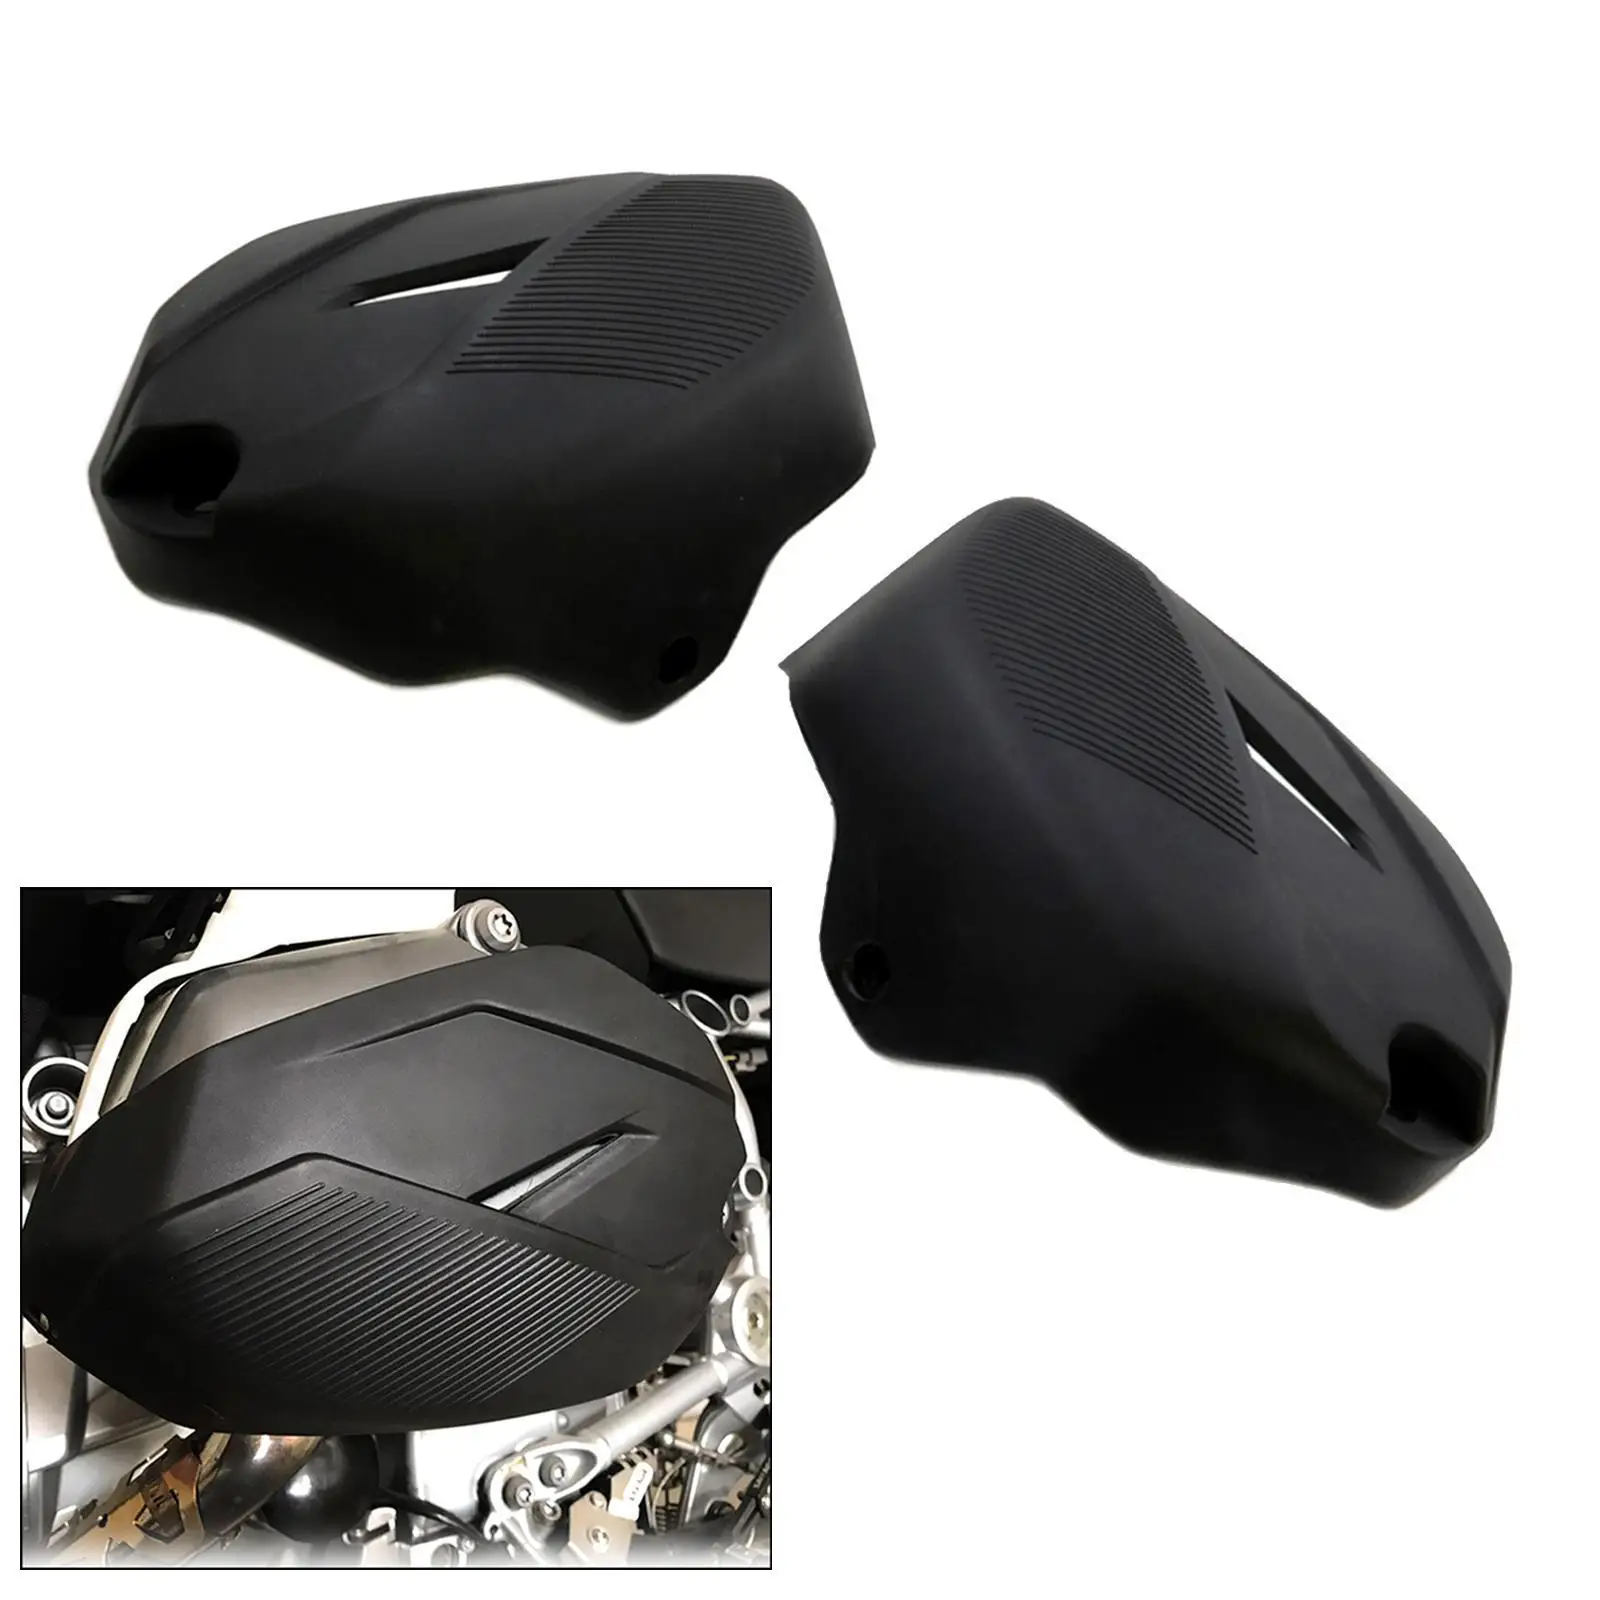 1 Pair Cylinder Head Engine Guards Protector Cover for  R1200GS LC ADV R1200R 2014-2017, Lightweight and compact design